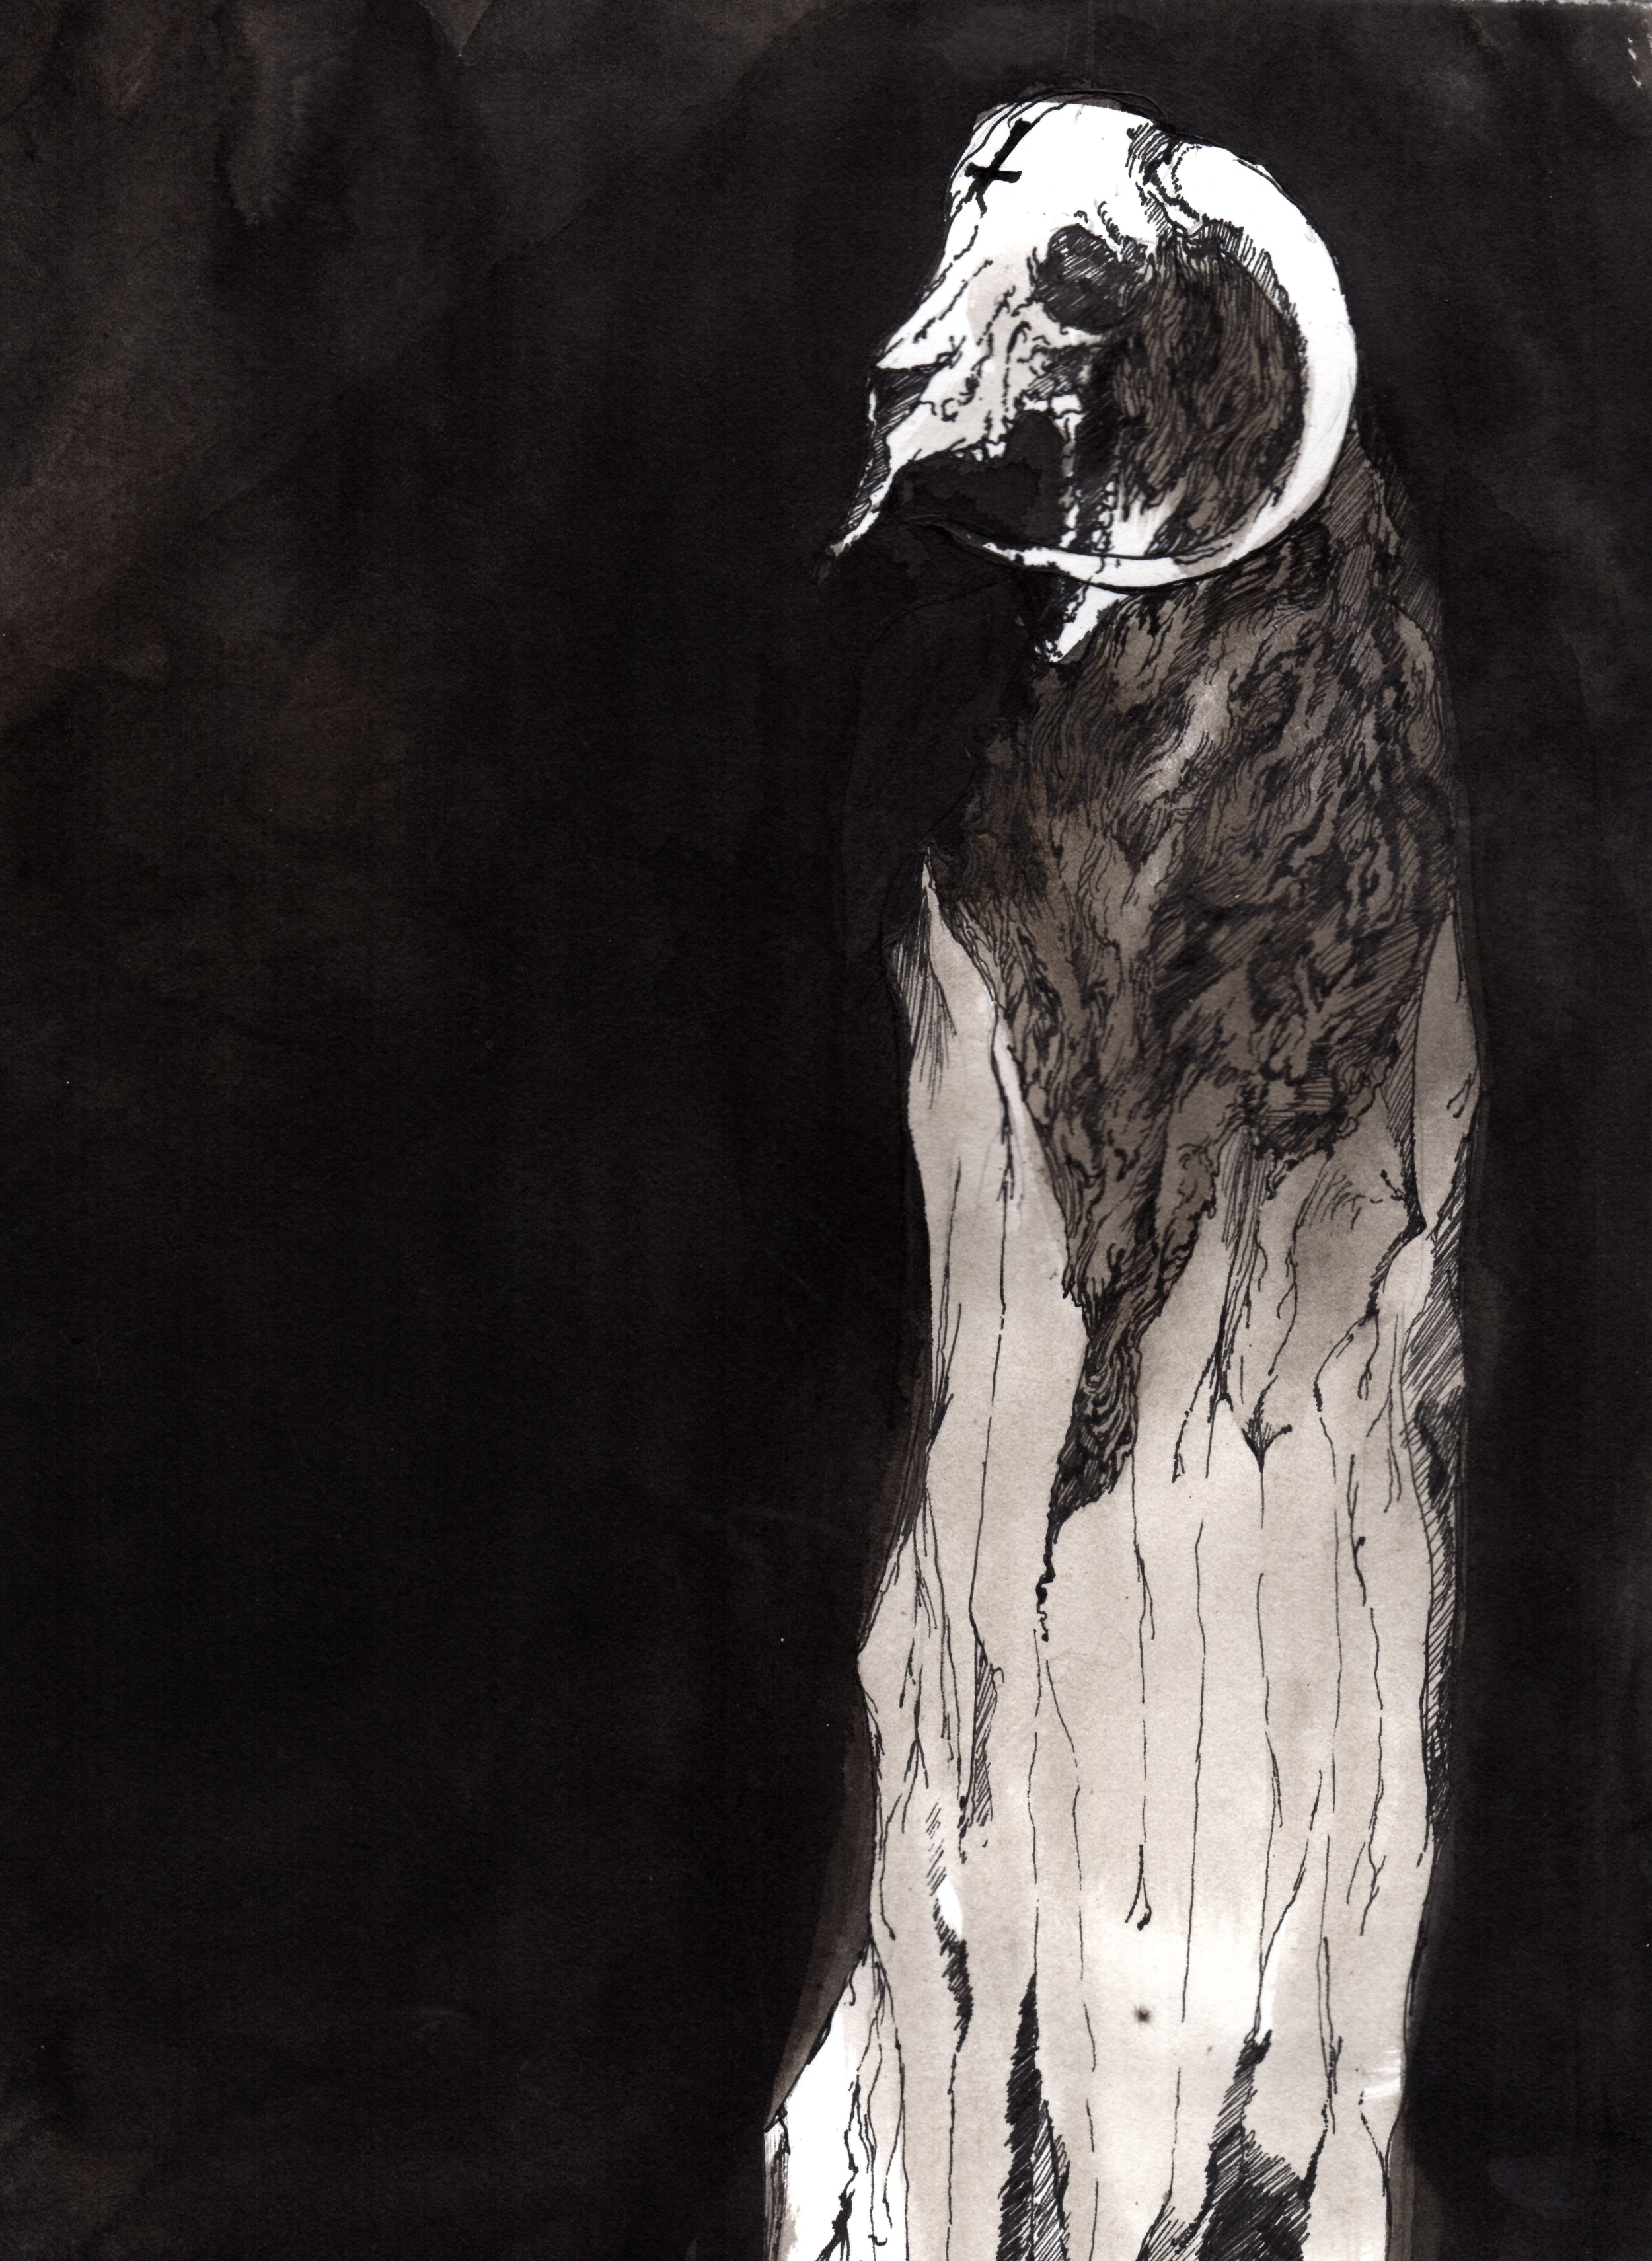    Invocation of the Black One  . 2013. 12 x 15 inches. Ink wash on paper. 